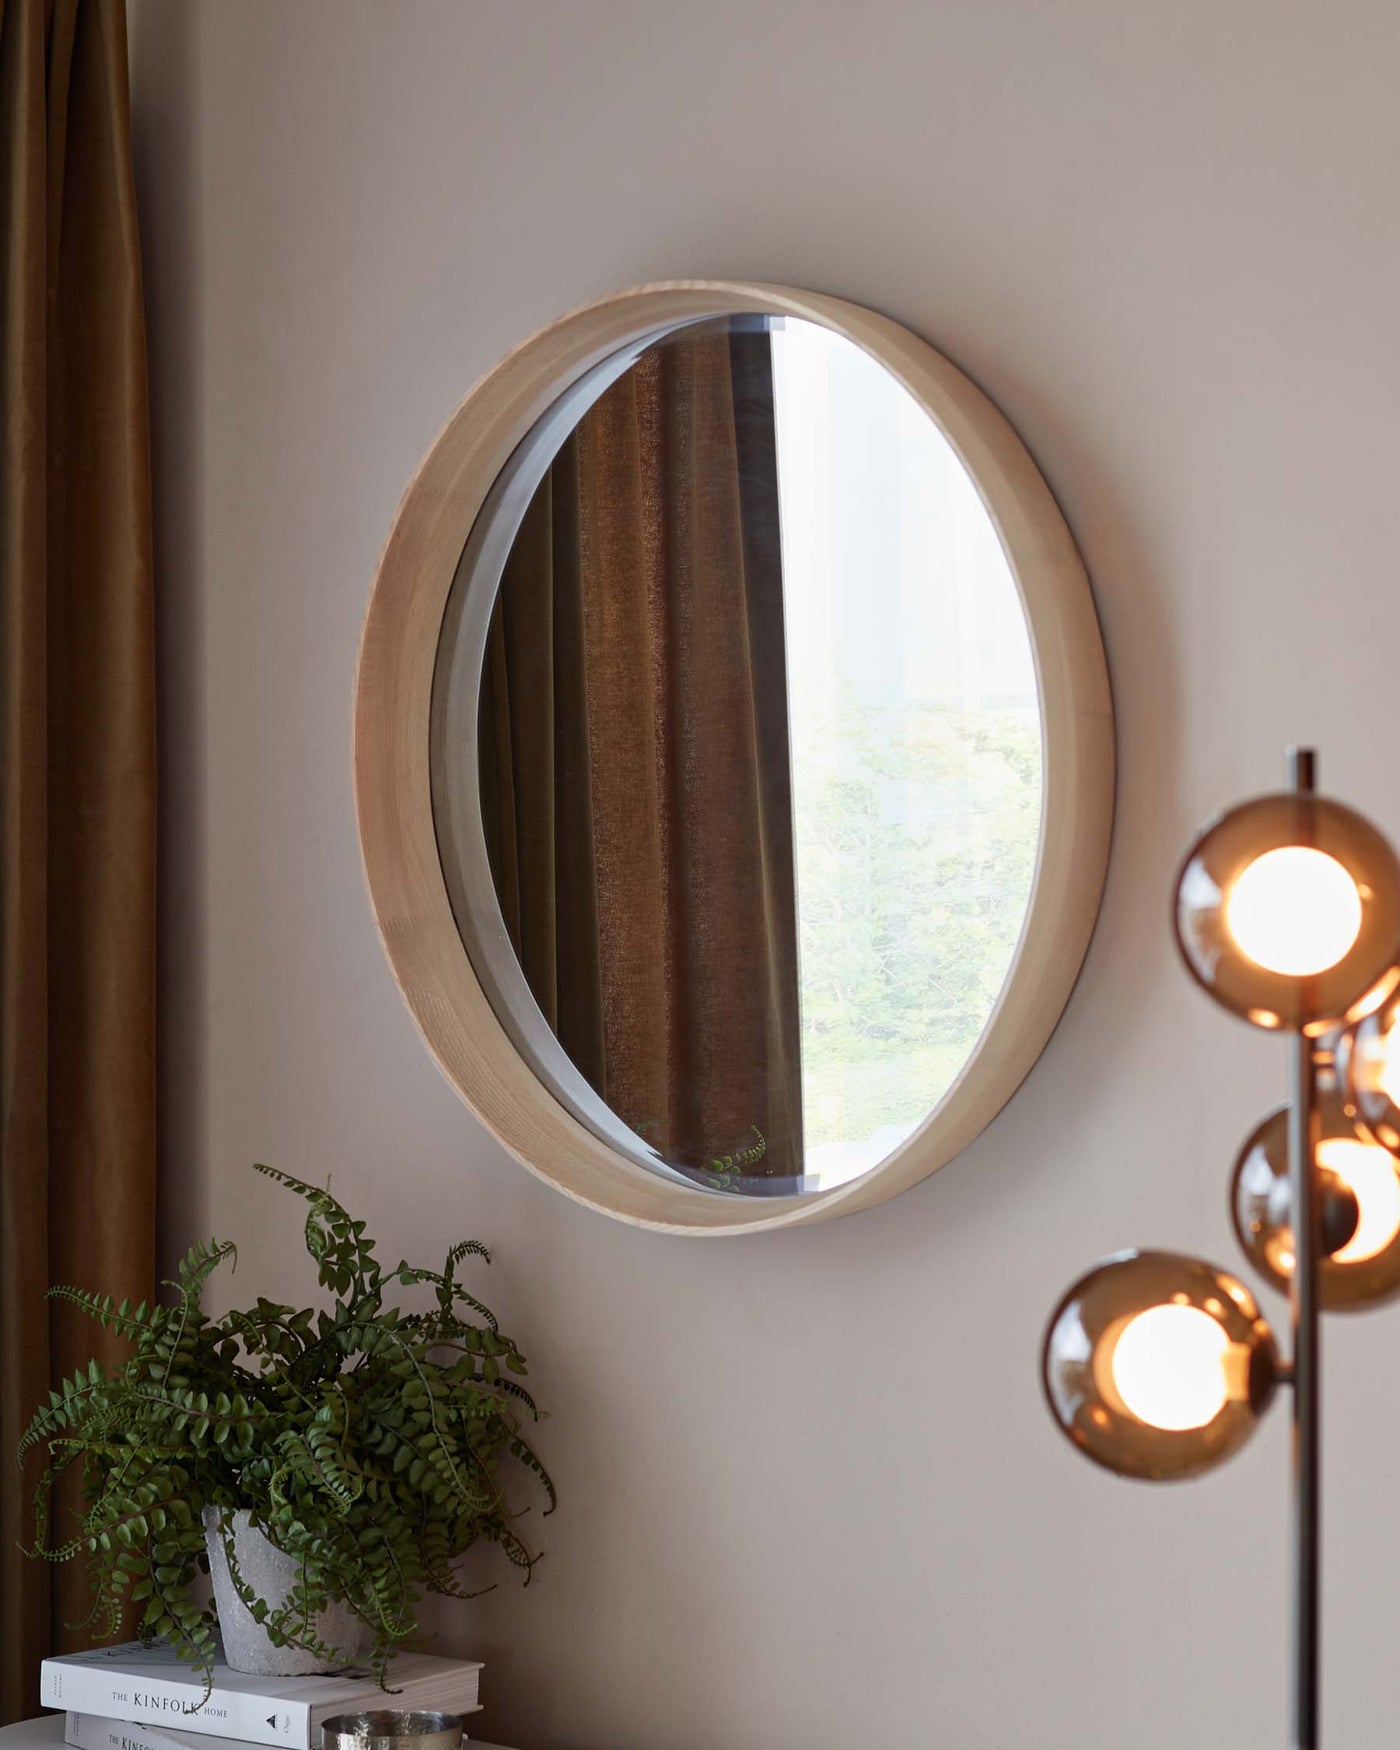 Round wooden mirror with a natural finish mounted on a wall beside a mid-century modern brass floor lamp with multiple globe lights. A potted fern sits on a stack of hardcover books below the mirror, hinting at a cosy reading corner or a stylish entryway vignette.